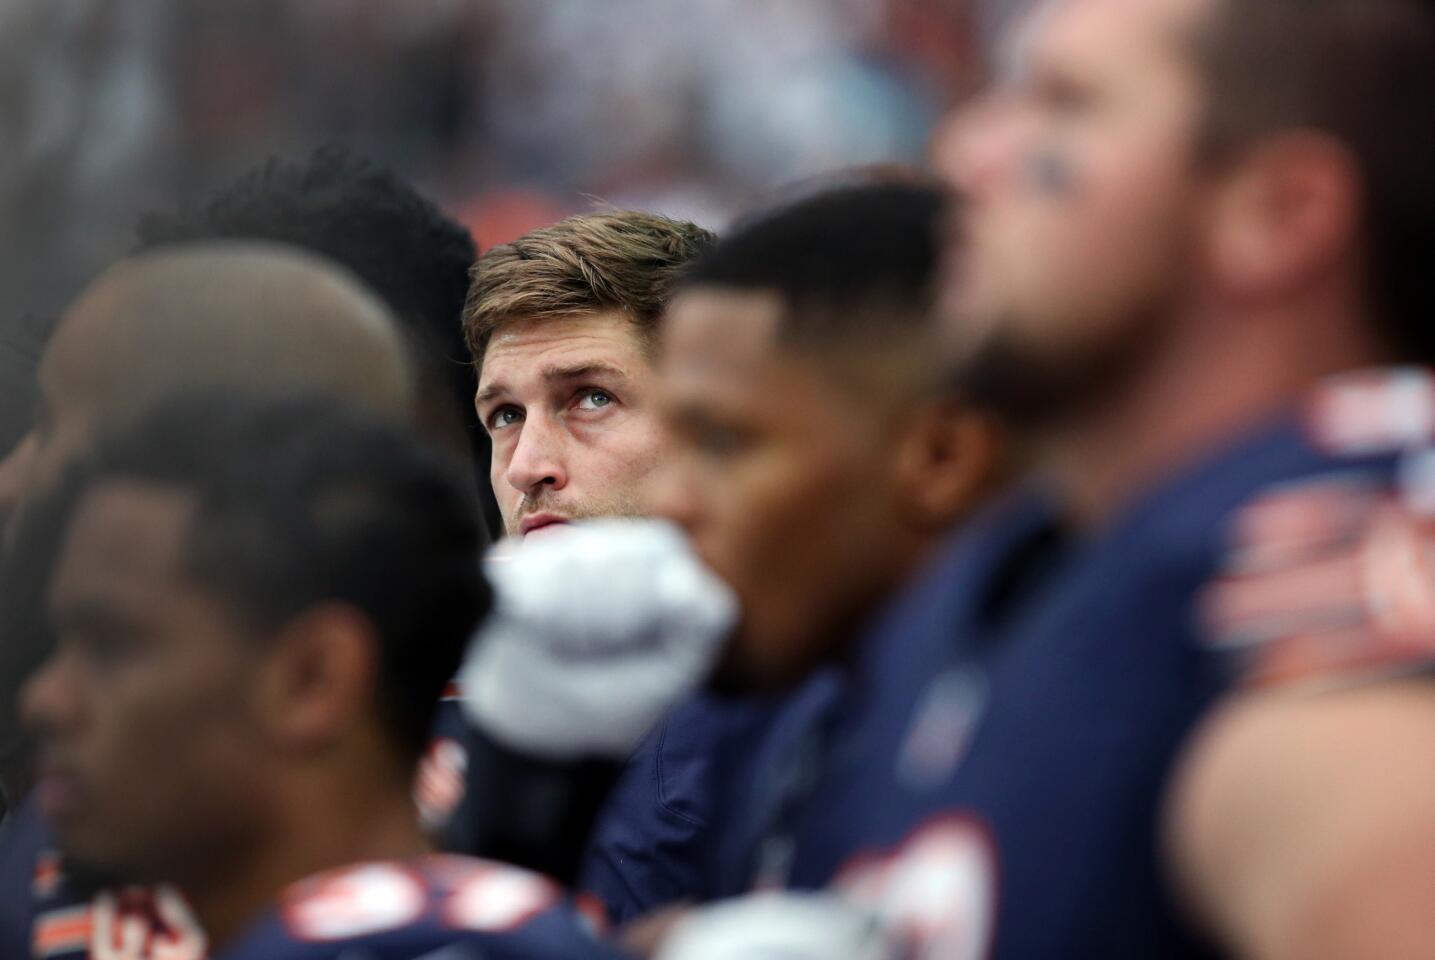 Jay Cutler looks up at the video board, during pregame ceremonies before the start of the season operner against the Texans at NRG Park on Sept. 11, 2016.